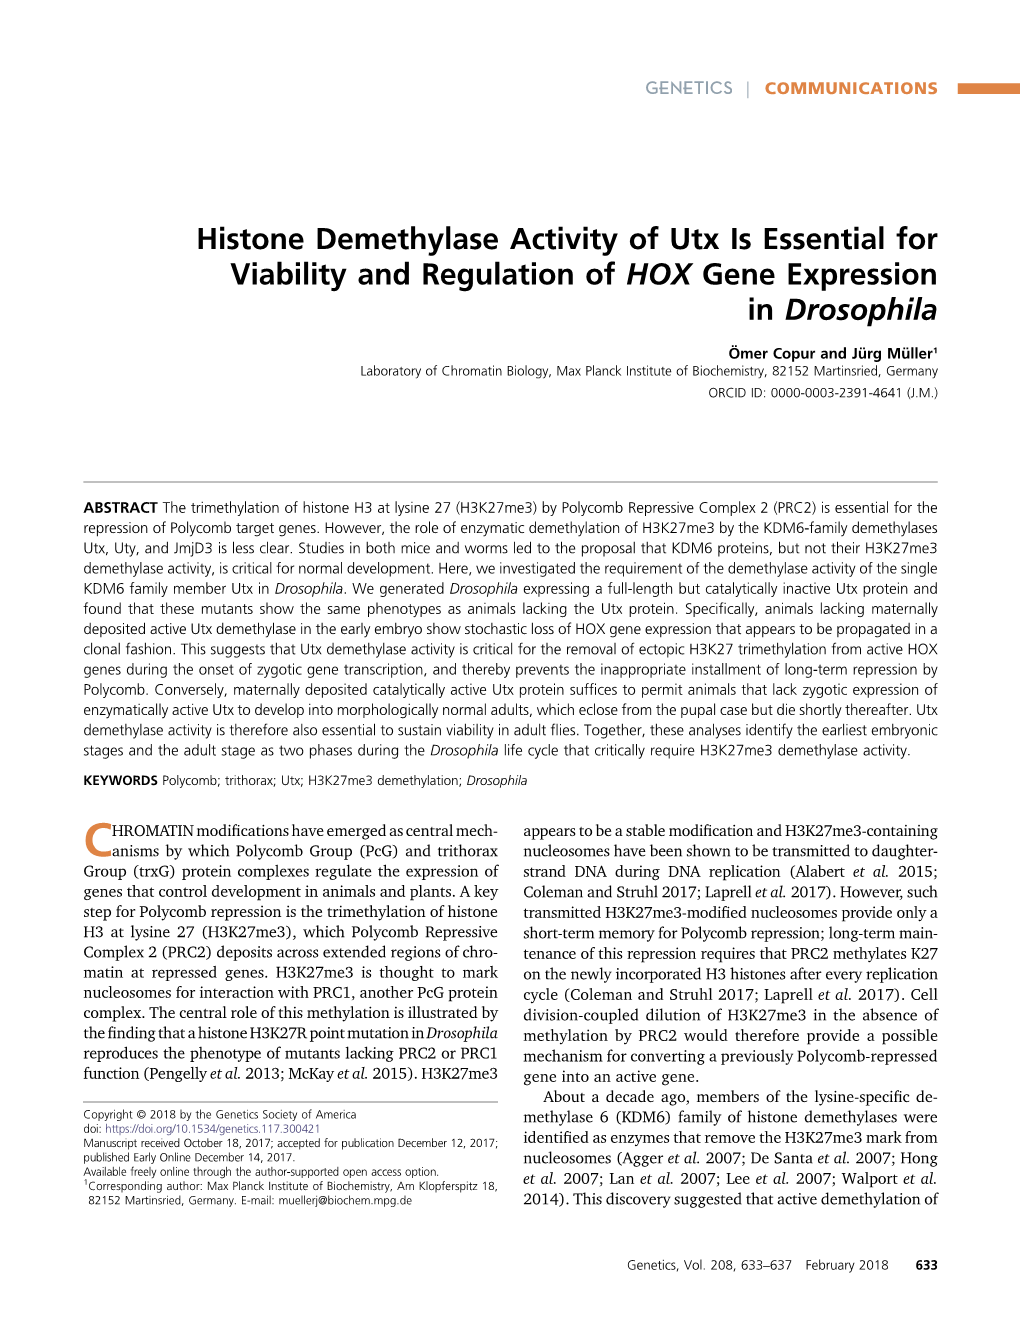 Histone Demethylase Activity of Utx Is Essential for Viability and Regulation of HOX Gene Expression in Drosophila